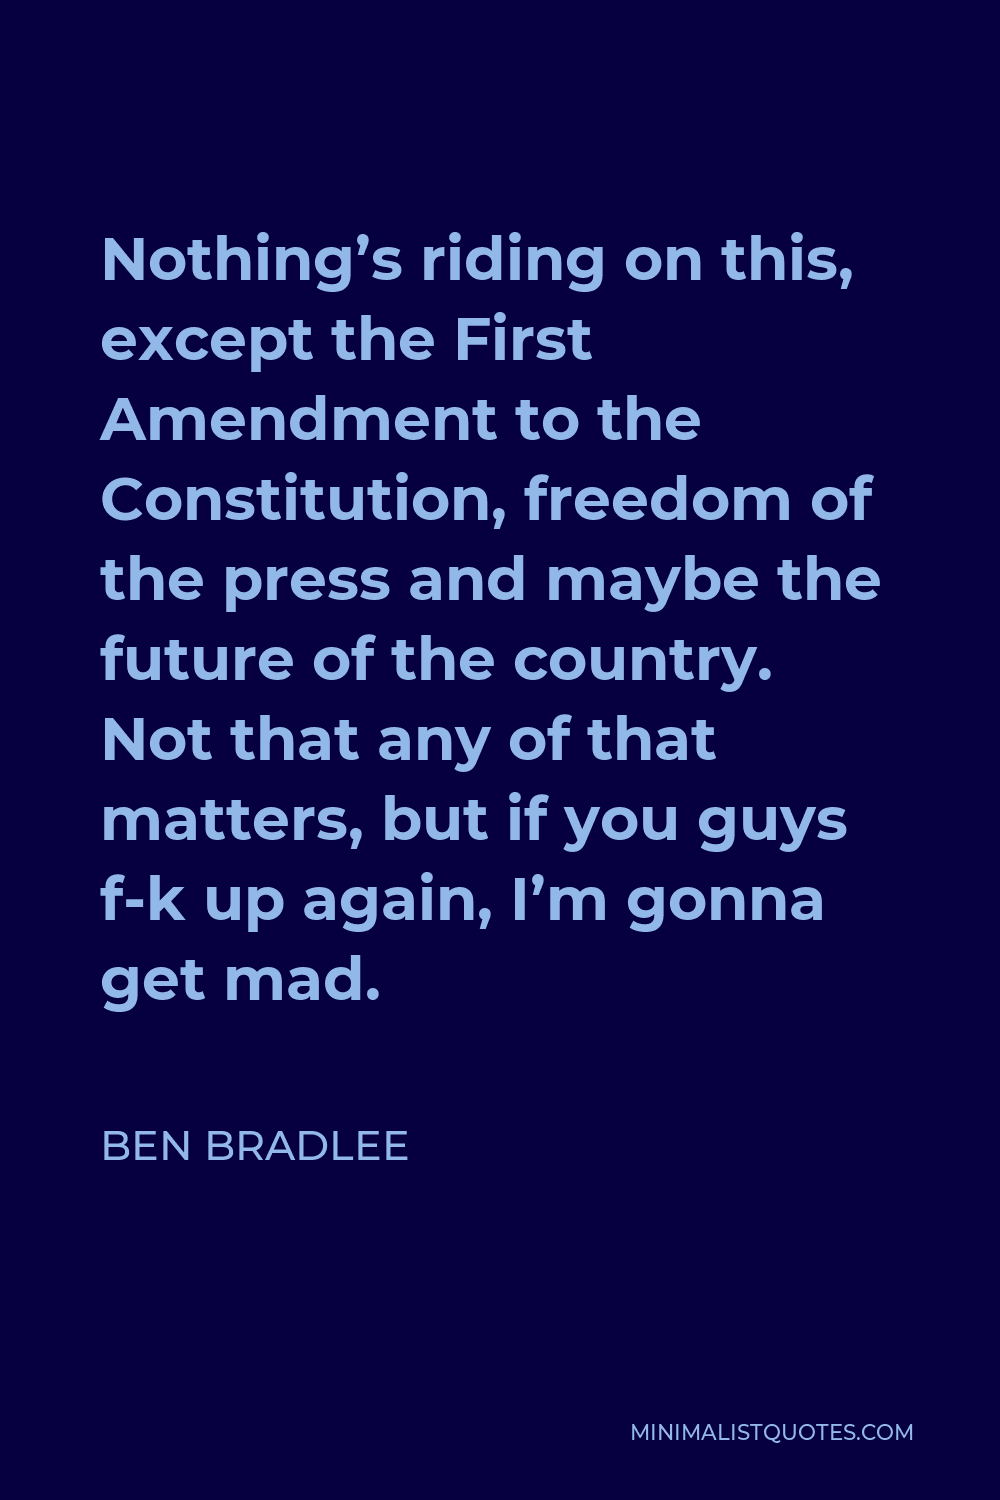 Ben Bradlee Quote - Nothing’s riding on this, except the First Amendment to the Constitution, freedom of the press and maybe the future of the country. Not that any of that matters, but if you guys f-k up again, I’m gonna get mad.